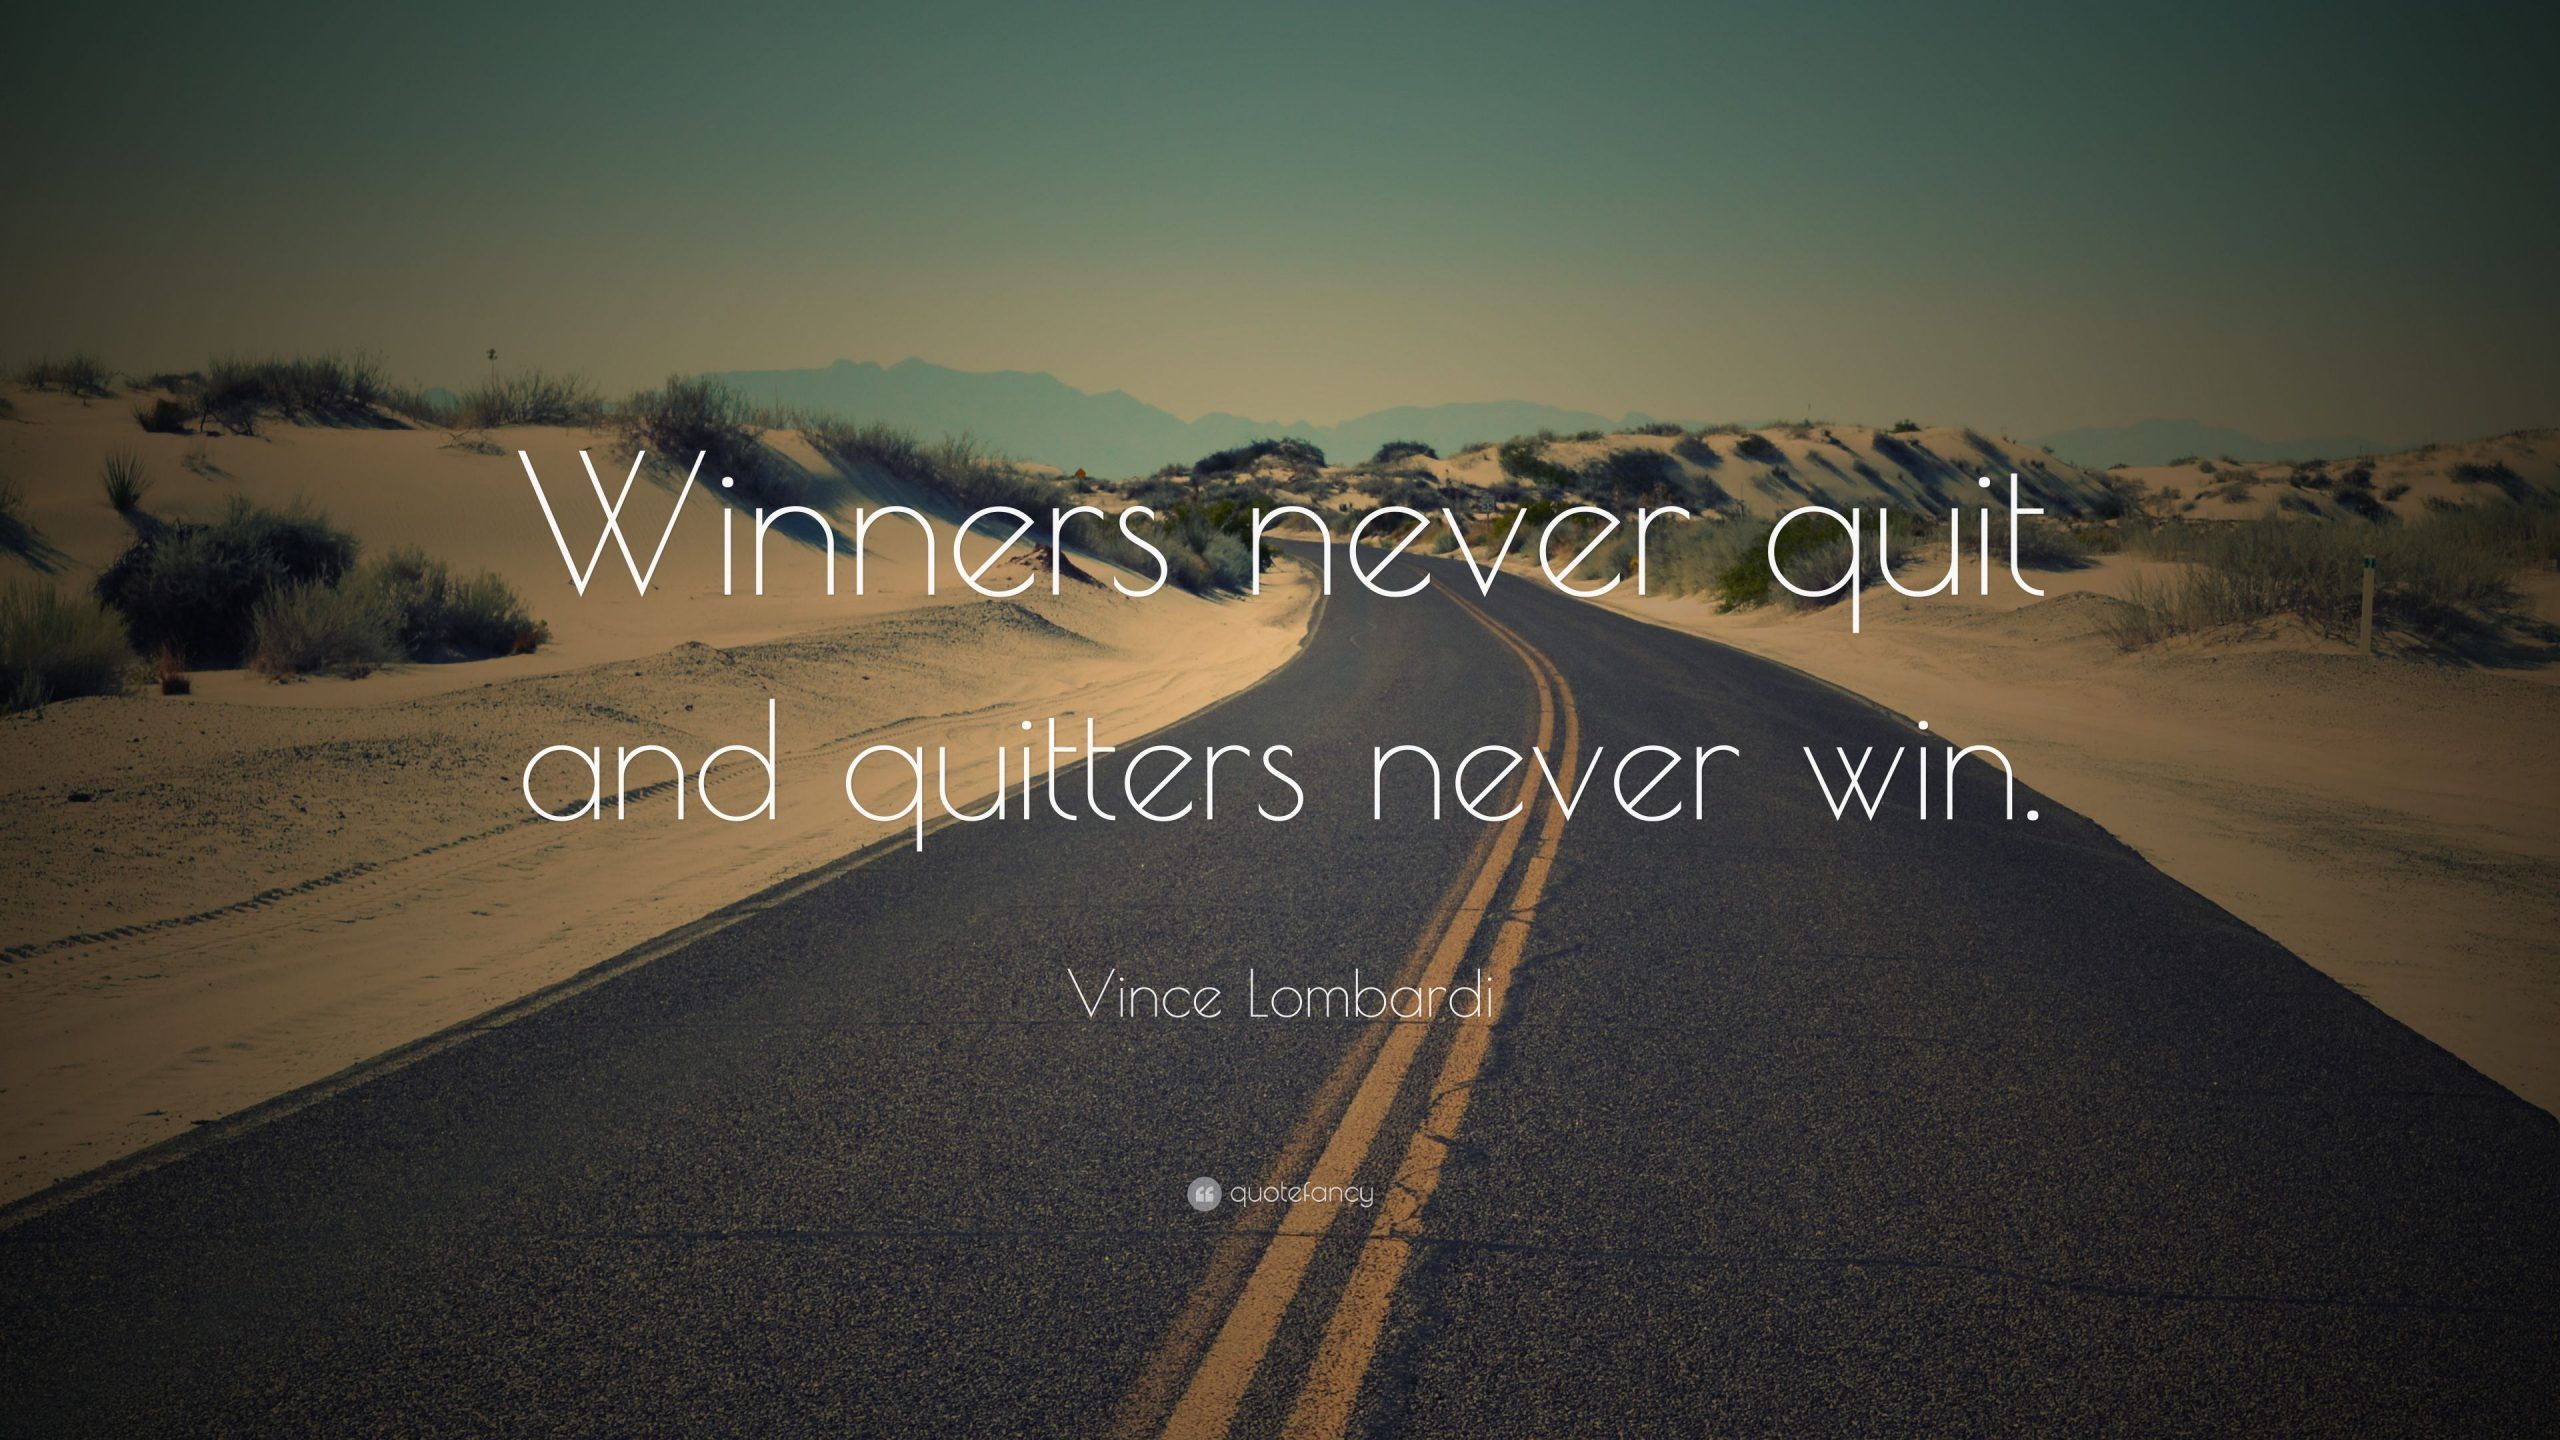 Quotes Outstanding Winner Never Quit And Quitters Win Image Inspirations Quotes Winners Pages Book With Outstanding Winner Never Quit And Quitters Never Win Image Inspirations